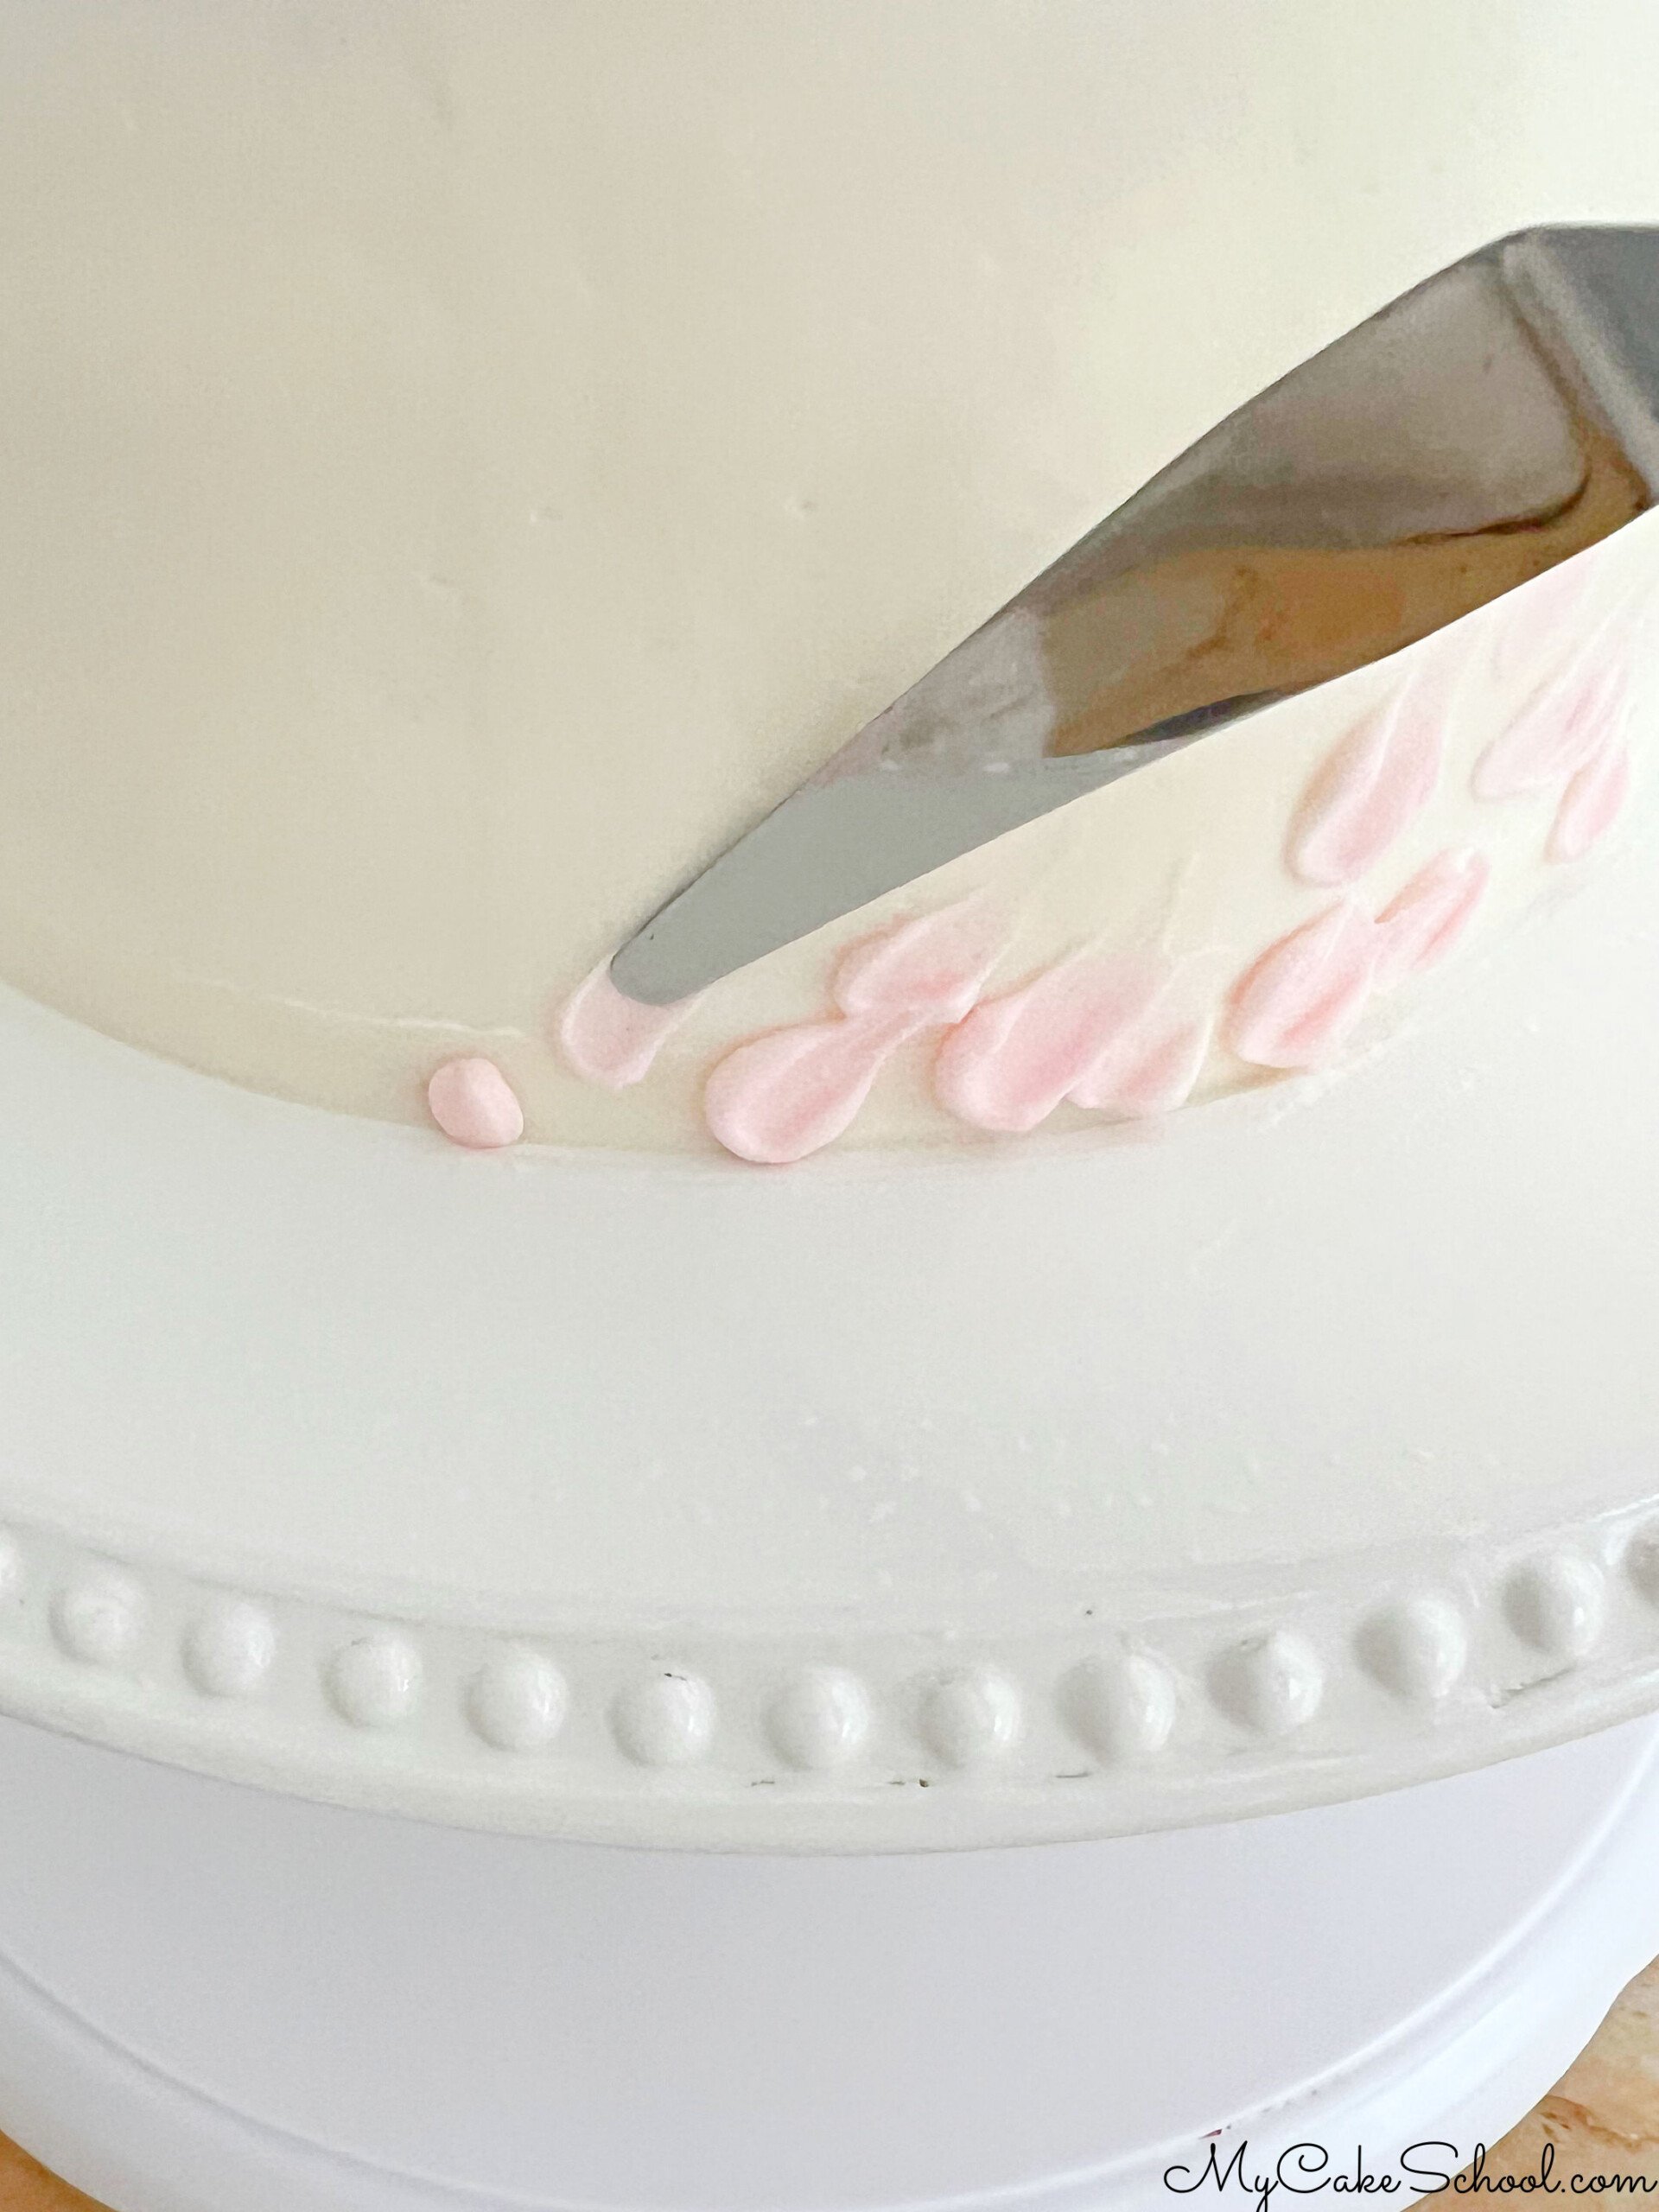 Adding texture to the frosted cake.